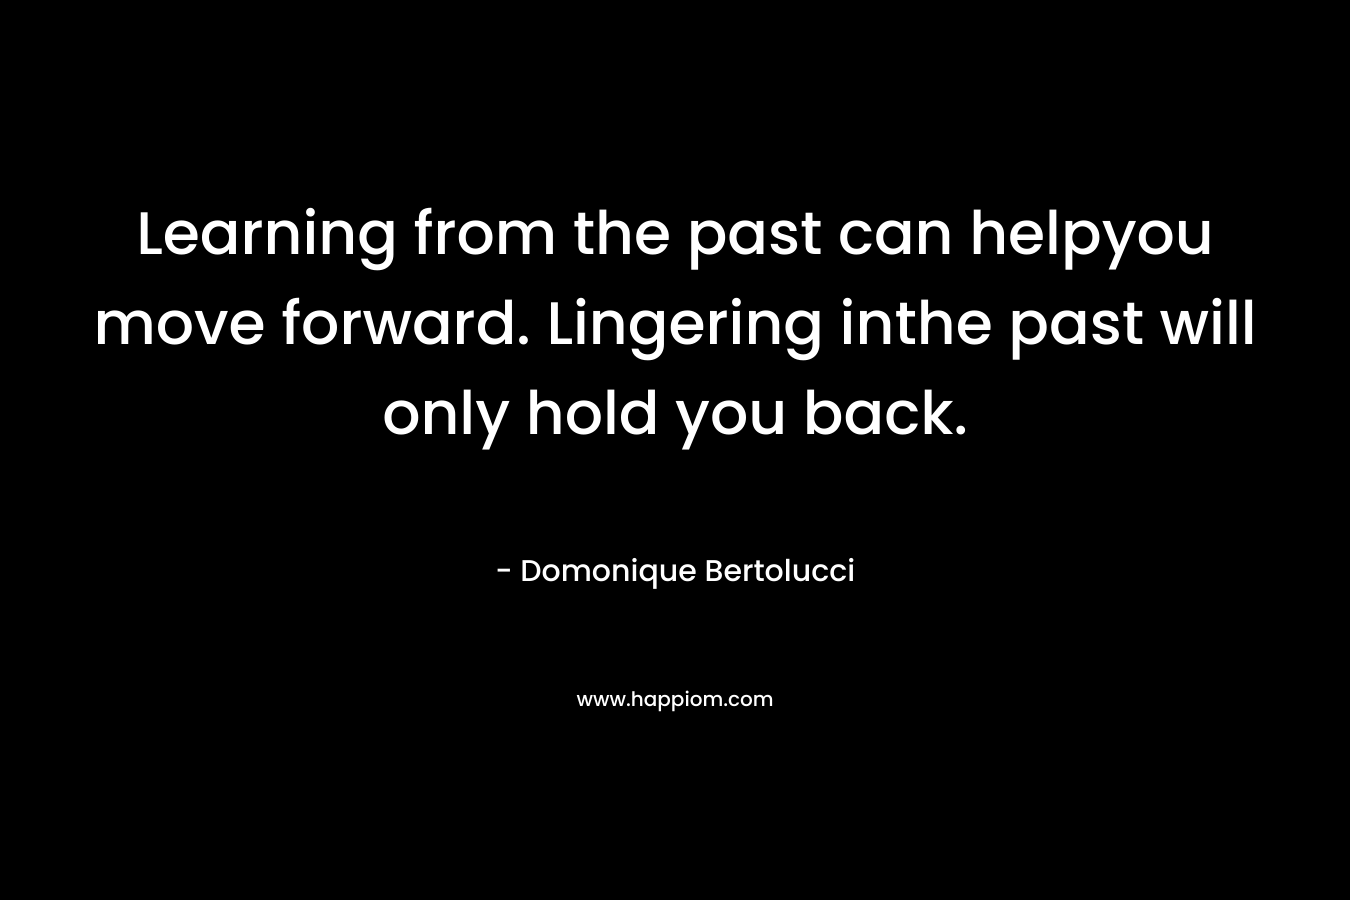 Learning from the past can helpyou move forward. Lingering inthe past will only hold you back.